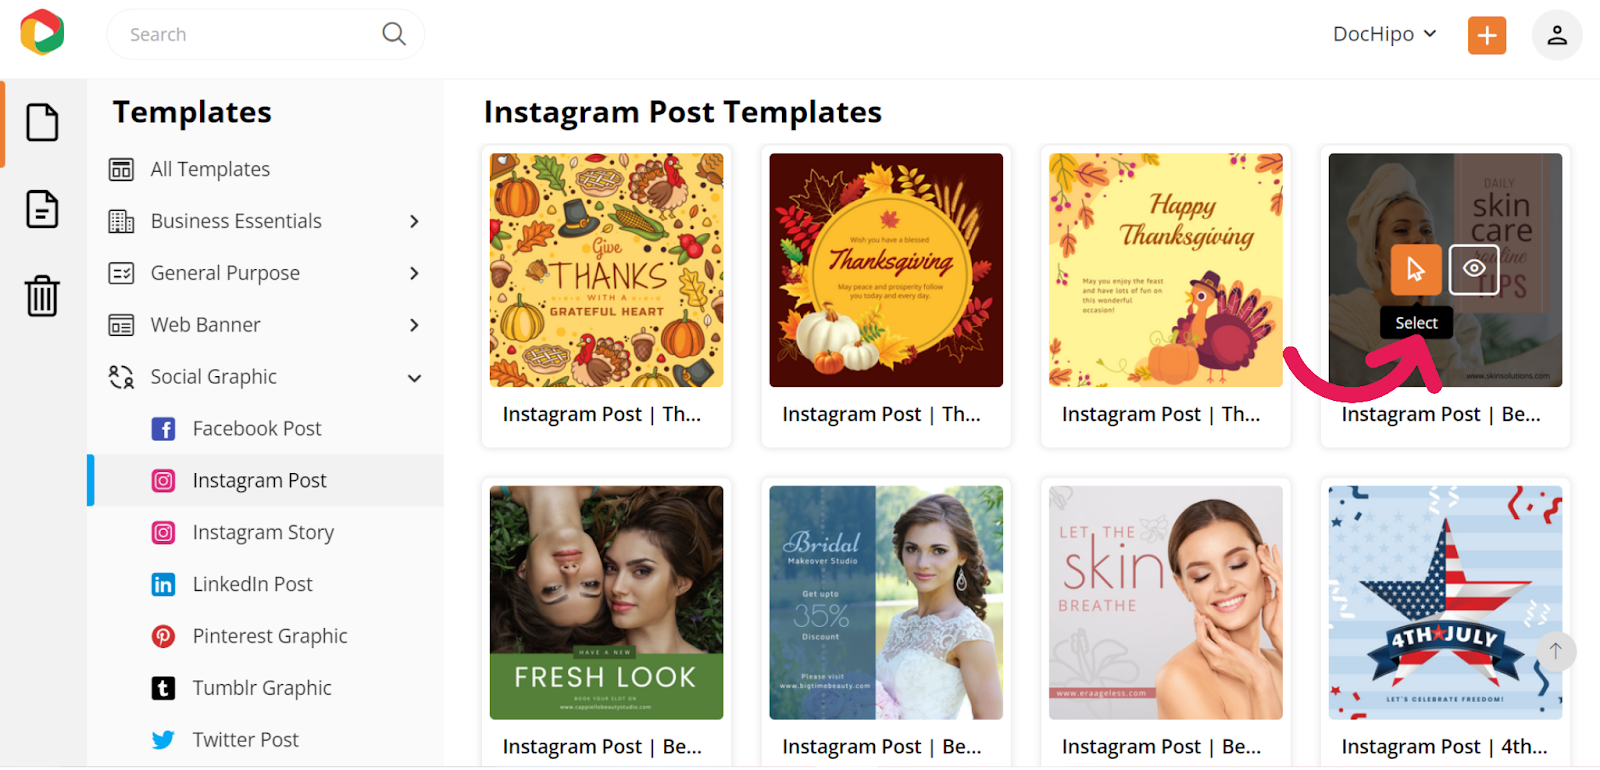 Select Instagram Post Template in DocHipo